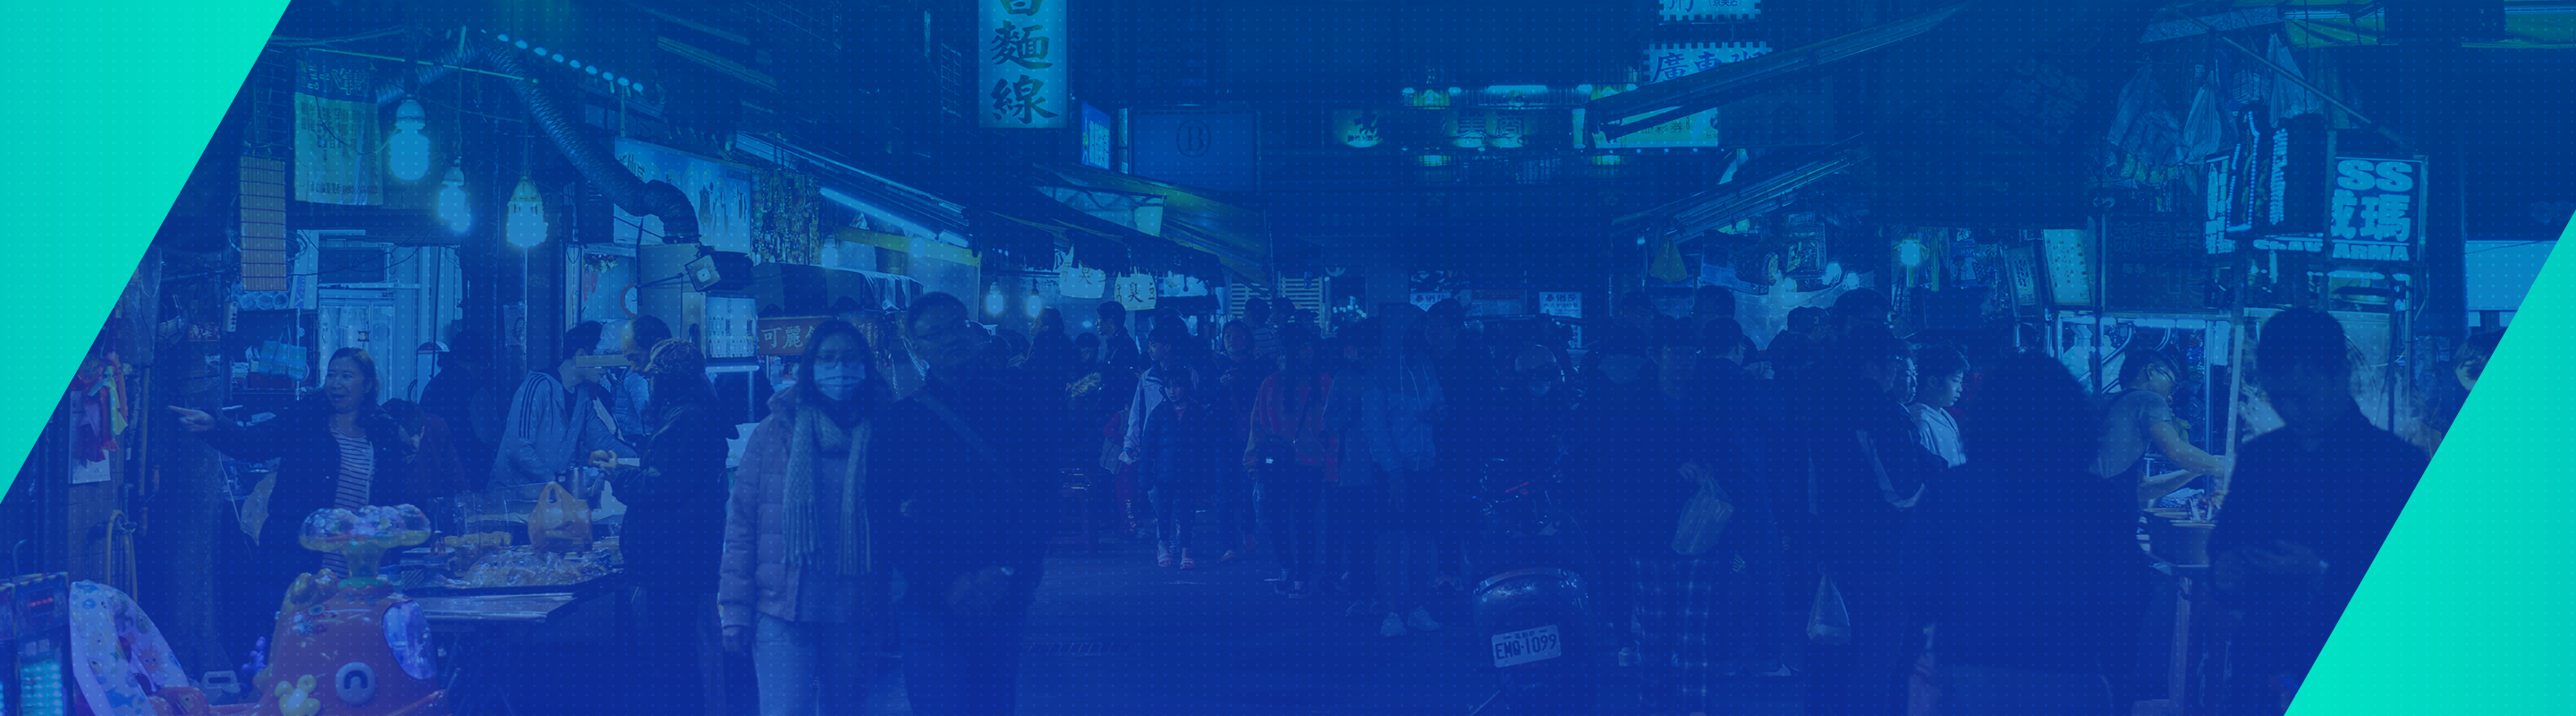 A night market in Taipei with a blue color filter